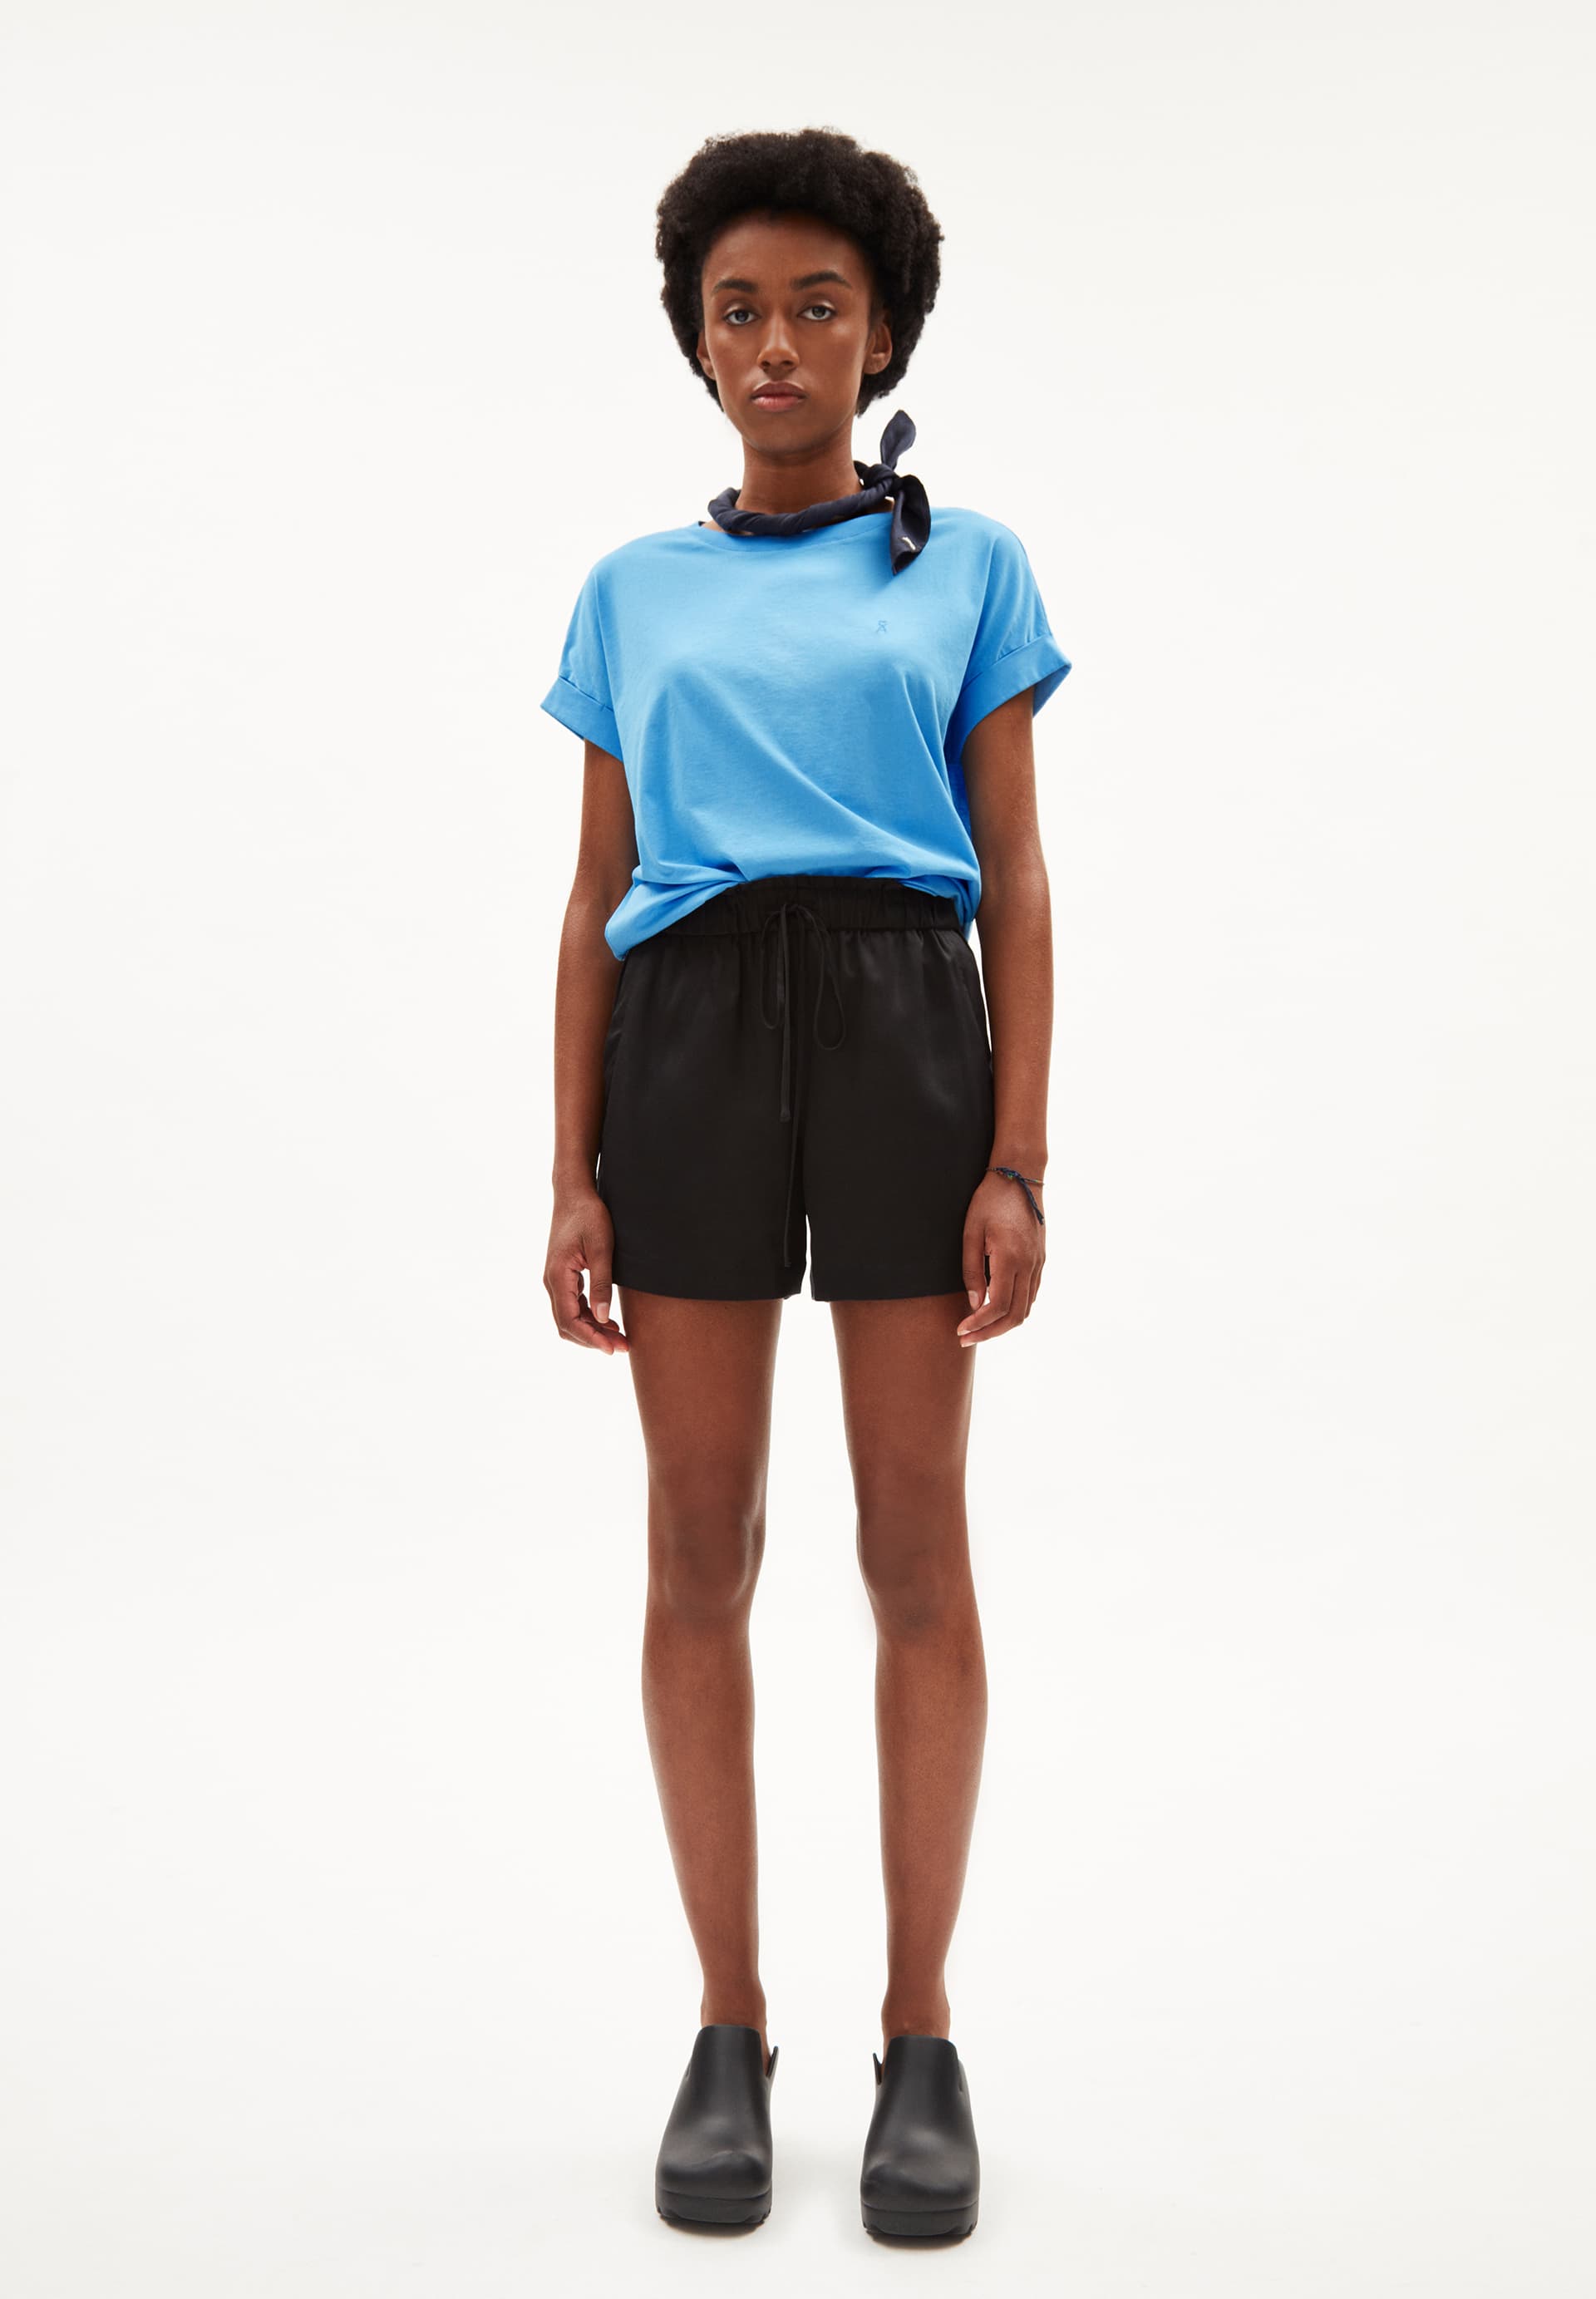 VAANNA Shorts Relaxed Fit made of TENCEL™ Lyocell